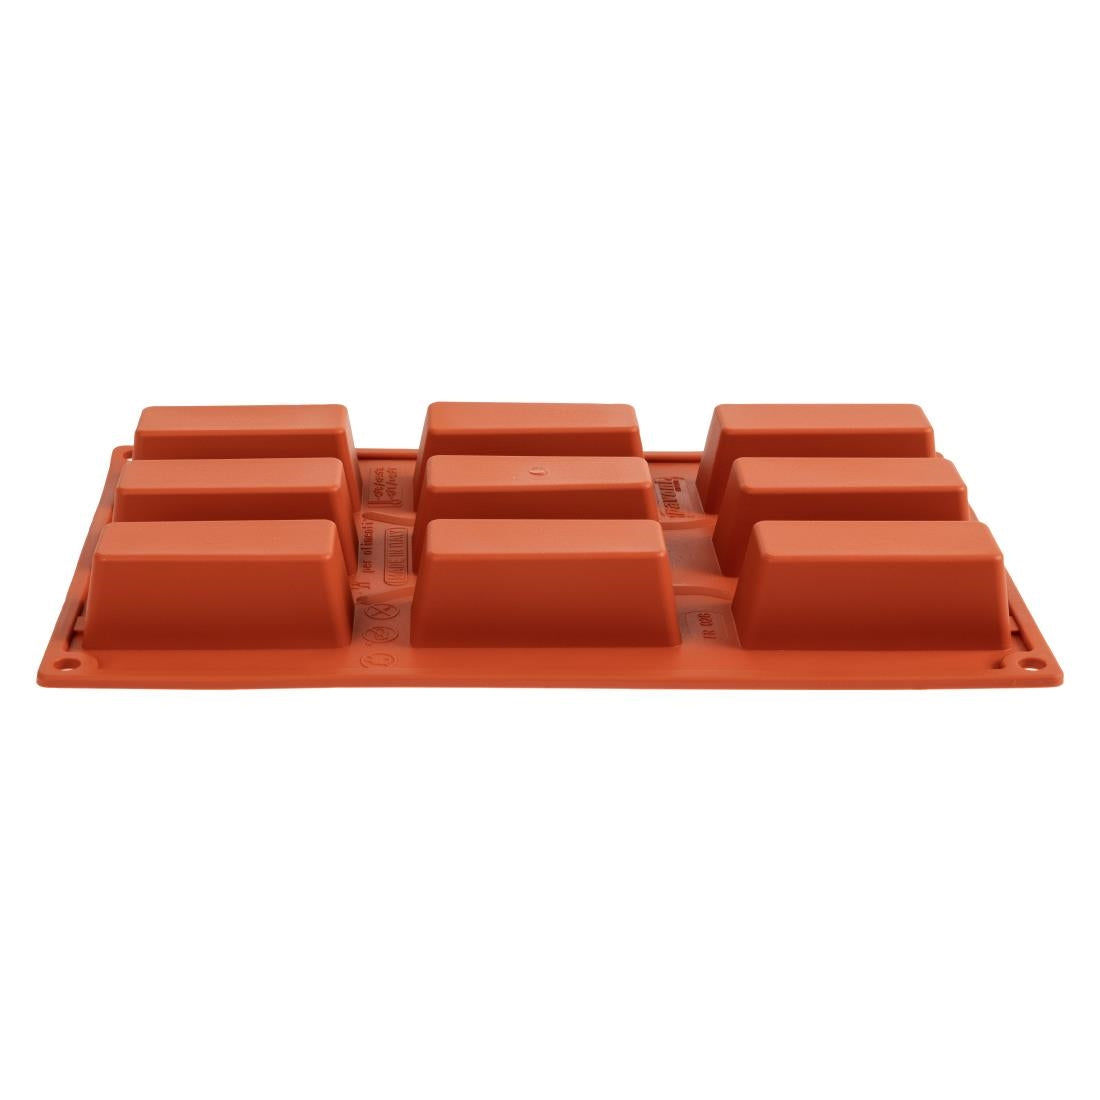 N941 Pavoni Formaflex Silicone Cake Mould 9 Cup